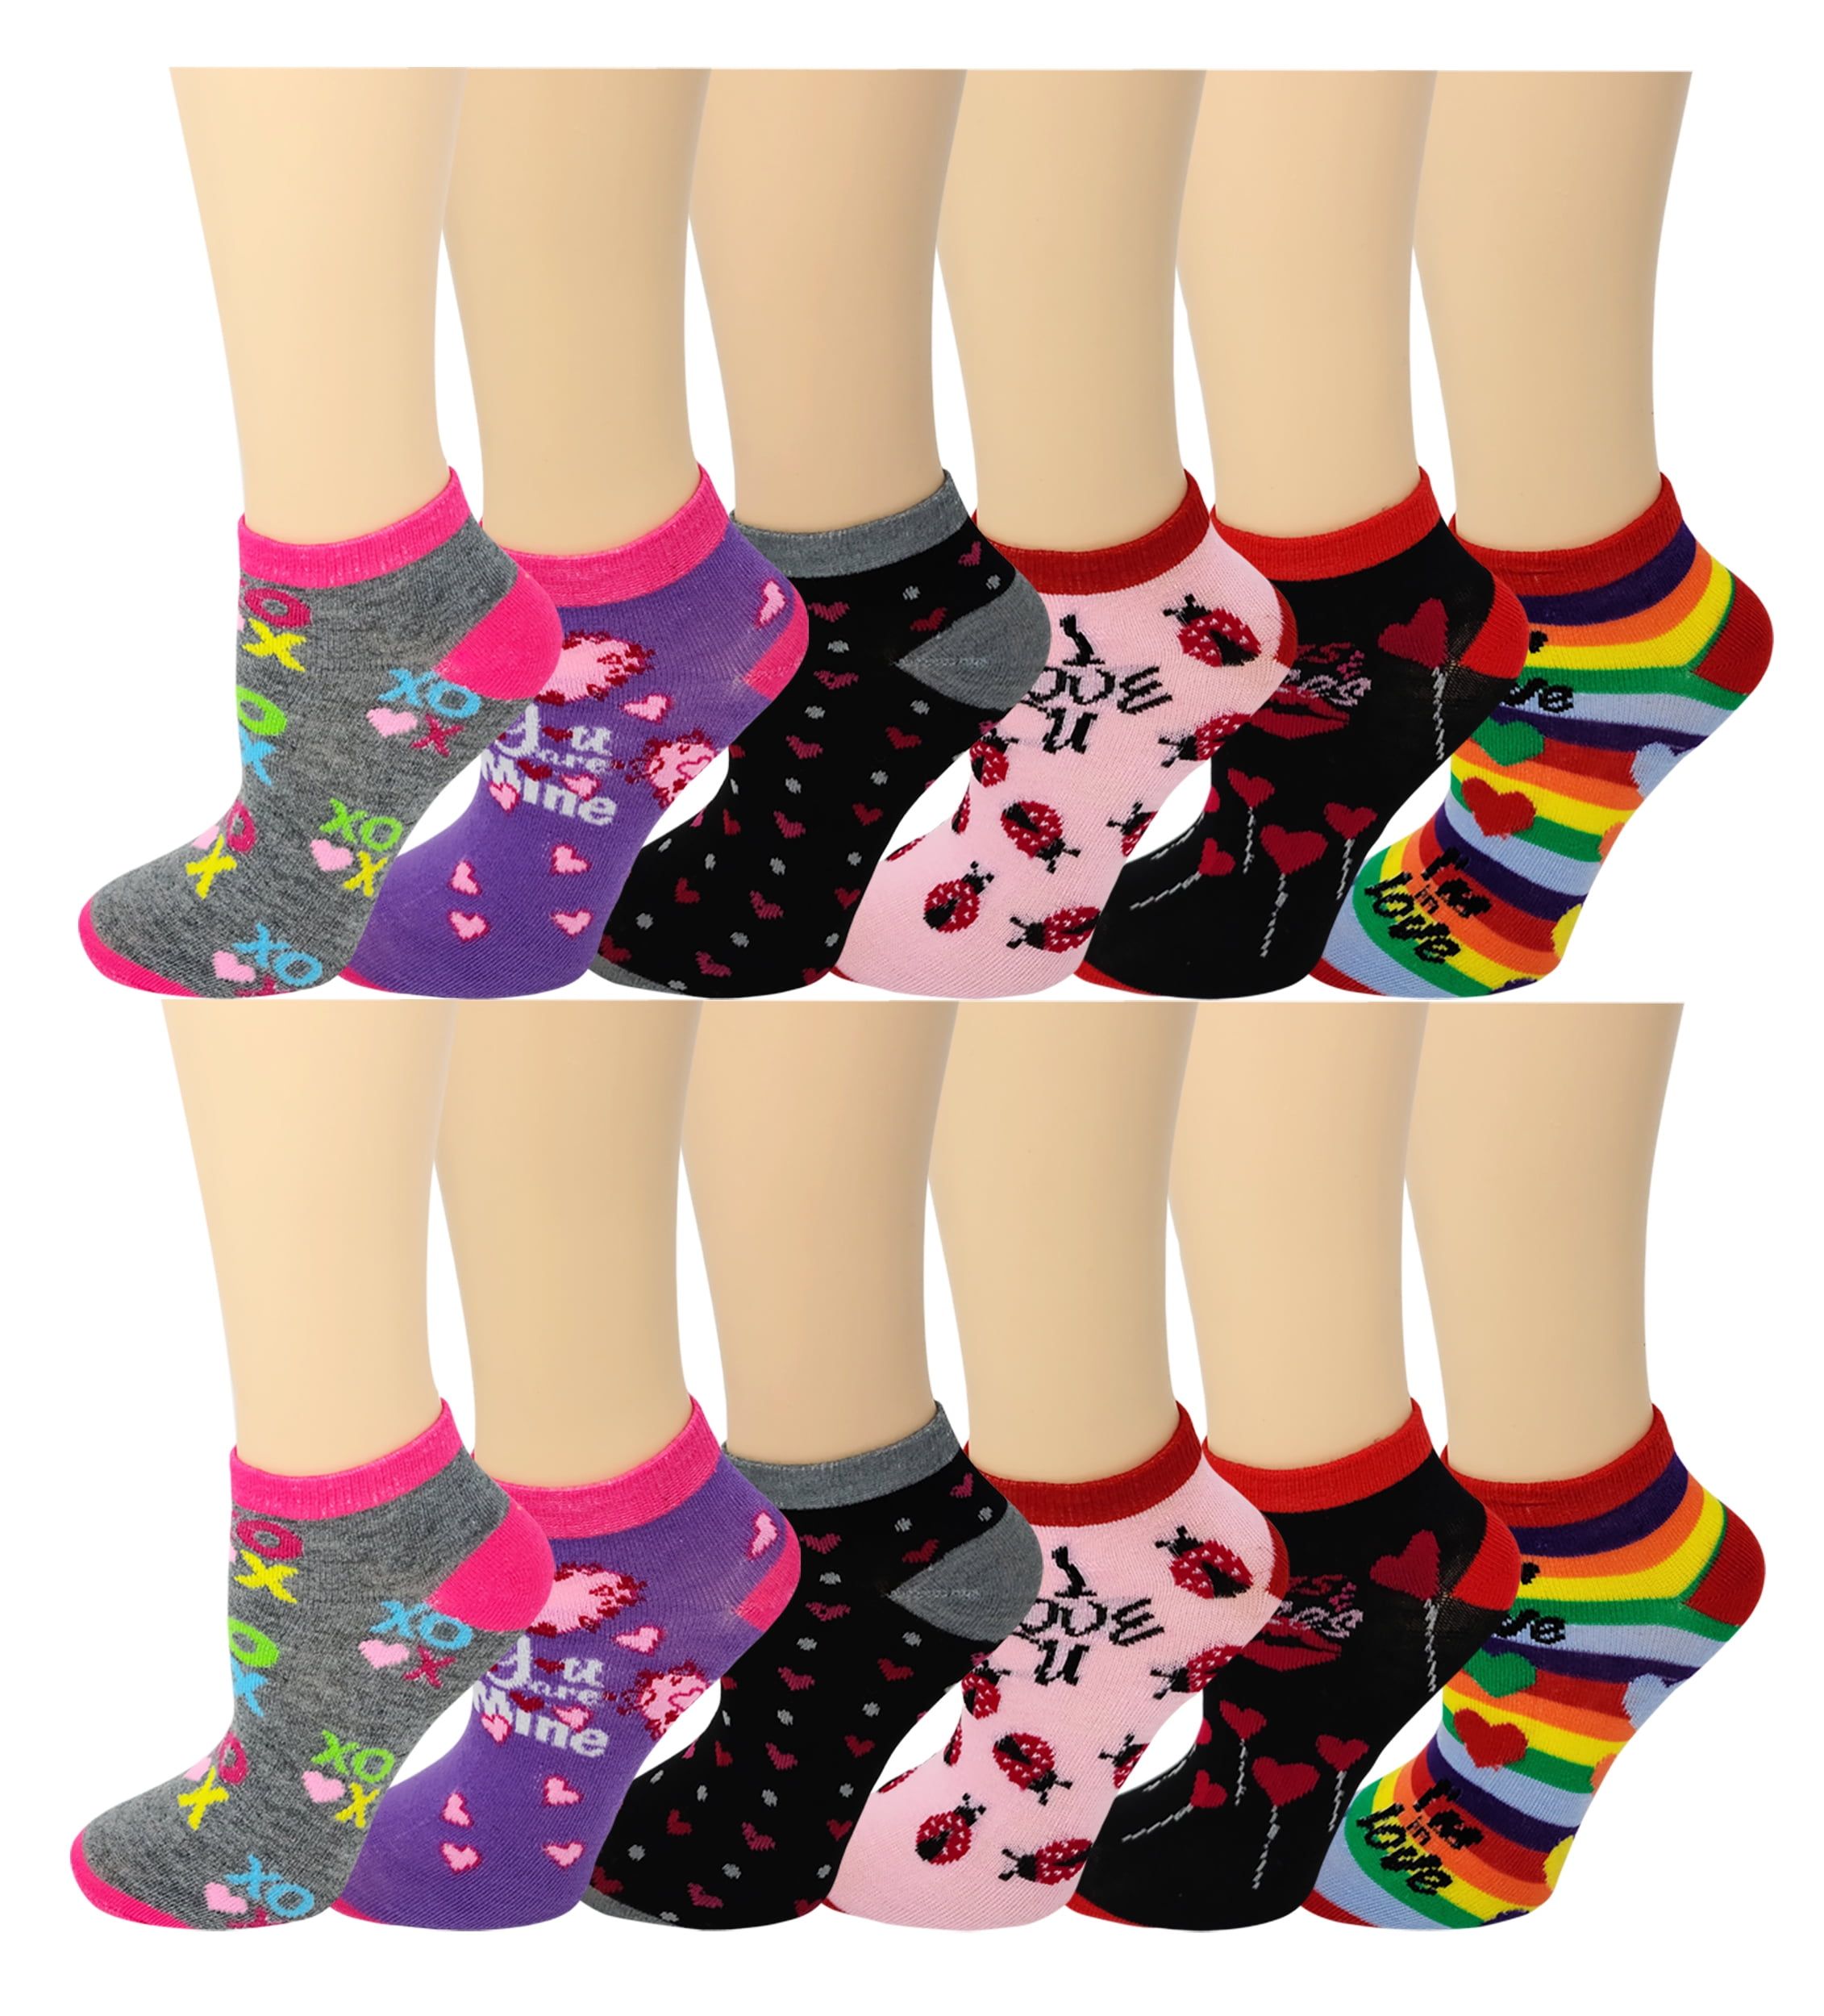 12 Pairs Pack Women Low Cut Neon Colorful Fancy Design Anklet Socks 9-11 